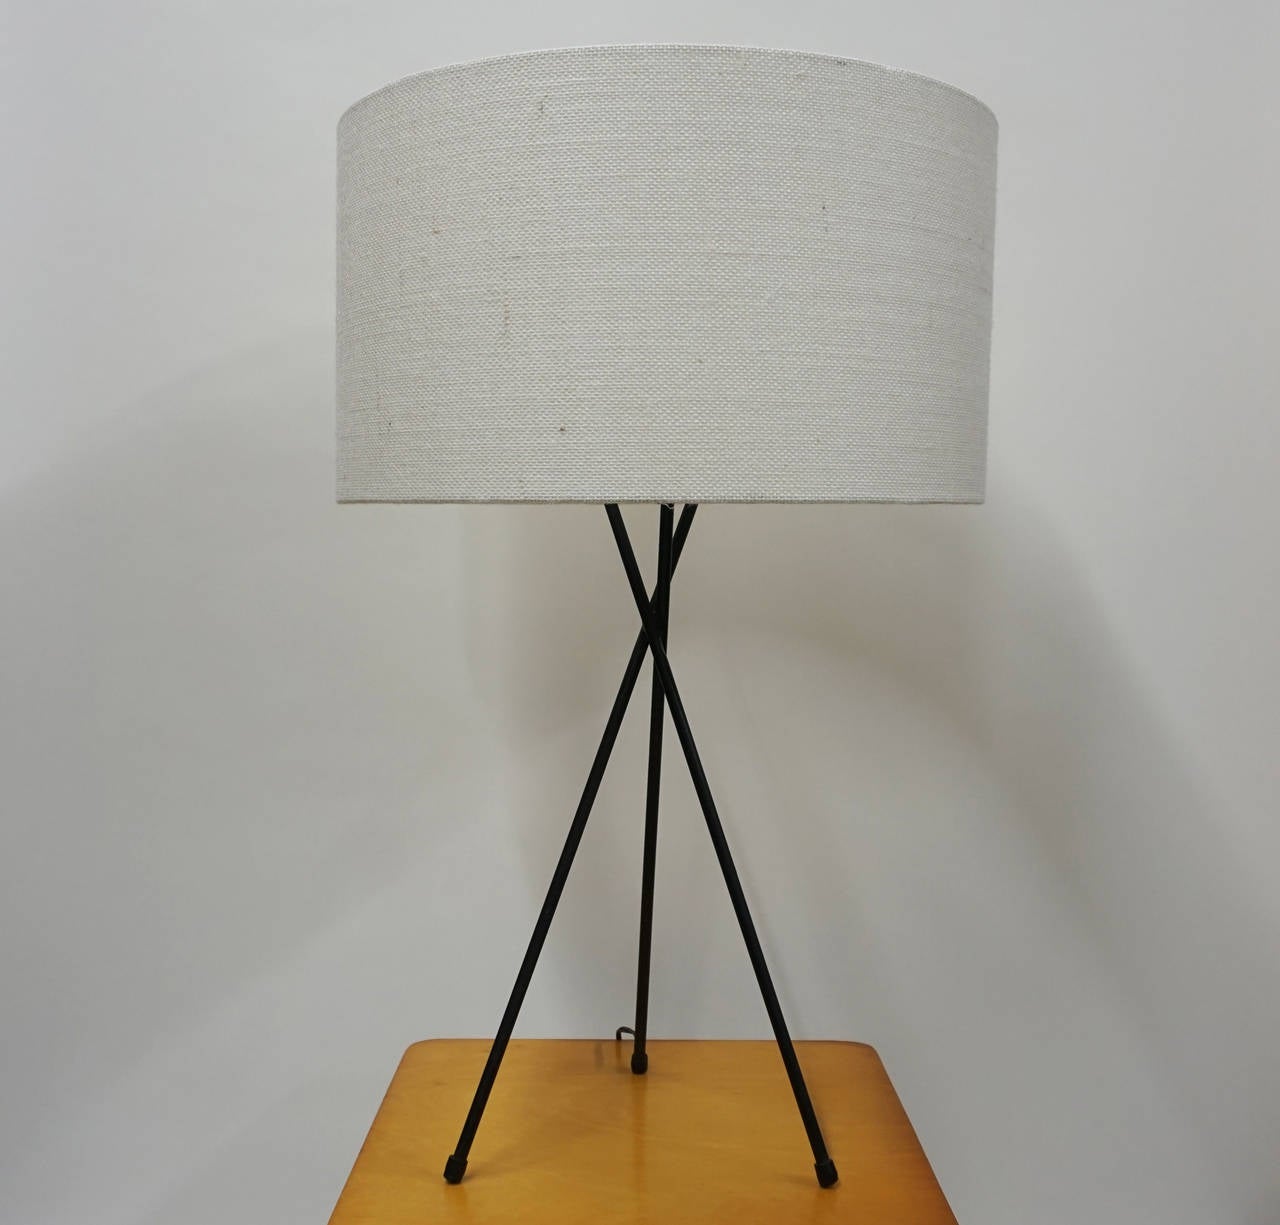 Sculptural iron table lamp from the 1950s. The lamp can be seen in photos promoting the early 1950s Pacifica design movement. 

New lampshade is 18